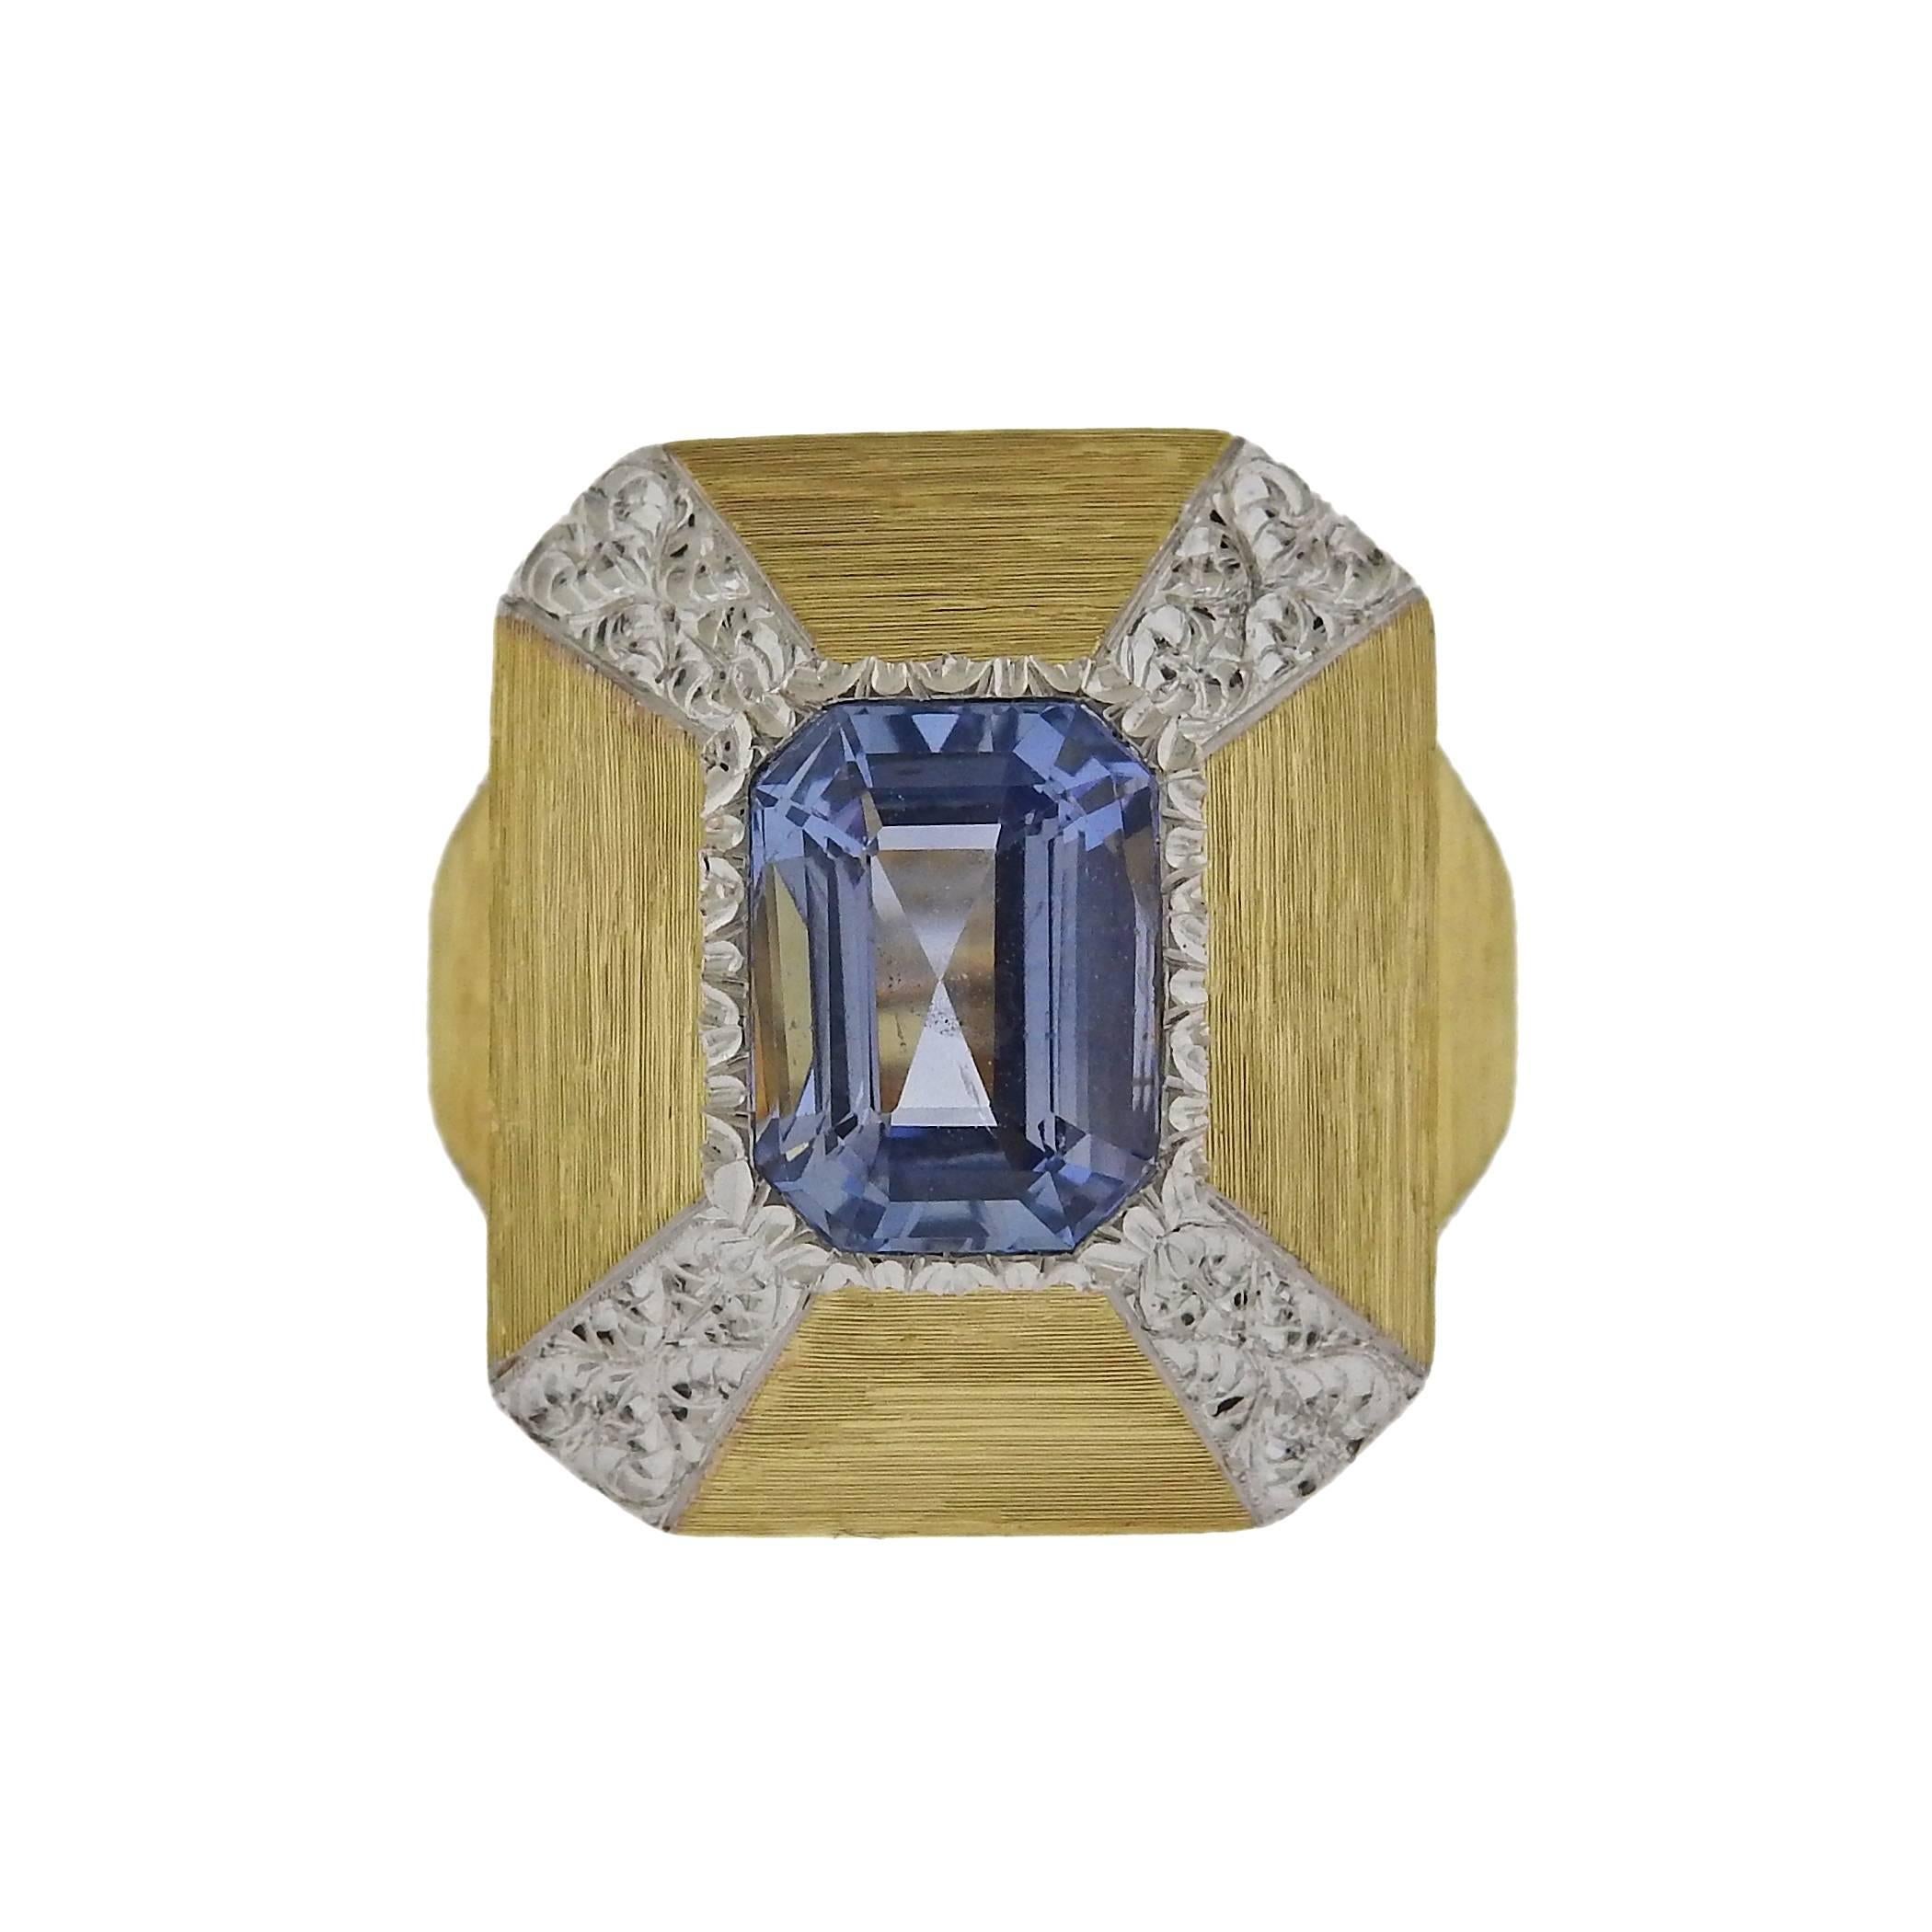 18k gold ring crafted by Buccellati featuring a 3.70ct sapphire center. Ring is a size 6, ring top is 21mm x 18mm. Marked T6526, Ialy, 18k, Buccellati . Weight is 10.3 grams. Comes with Buccellati paperwork and retails for $29,500.